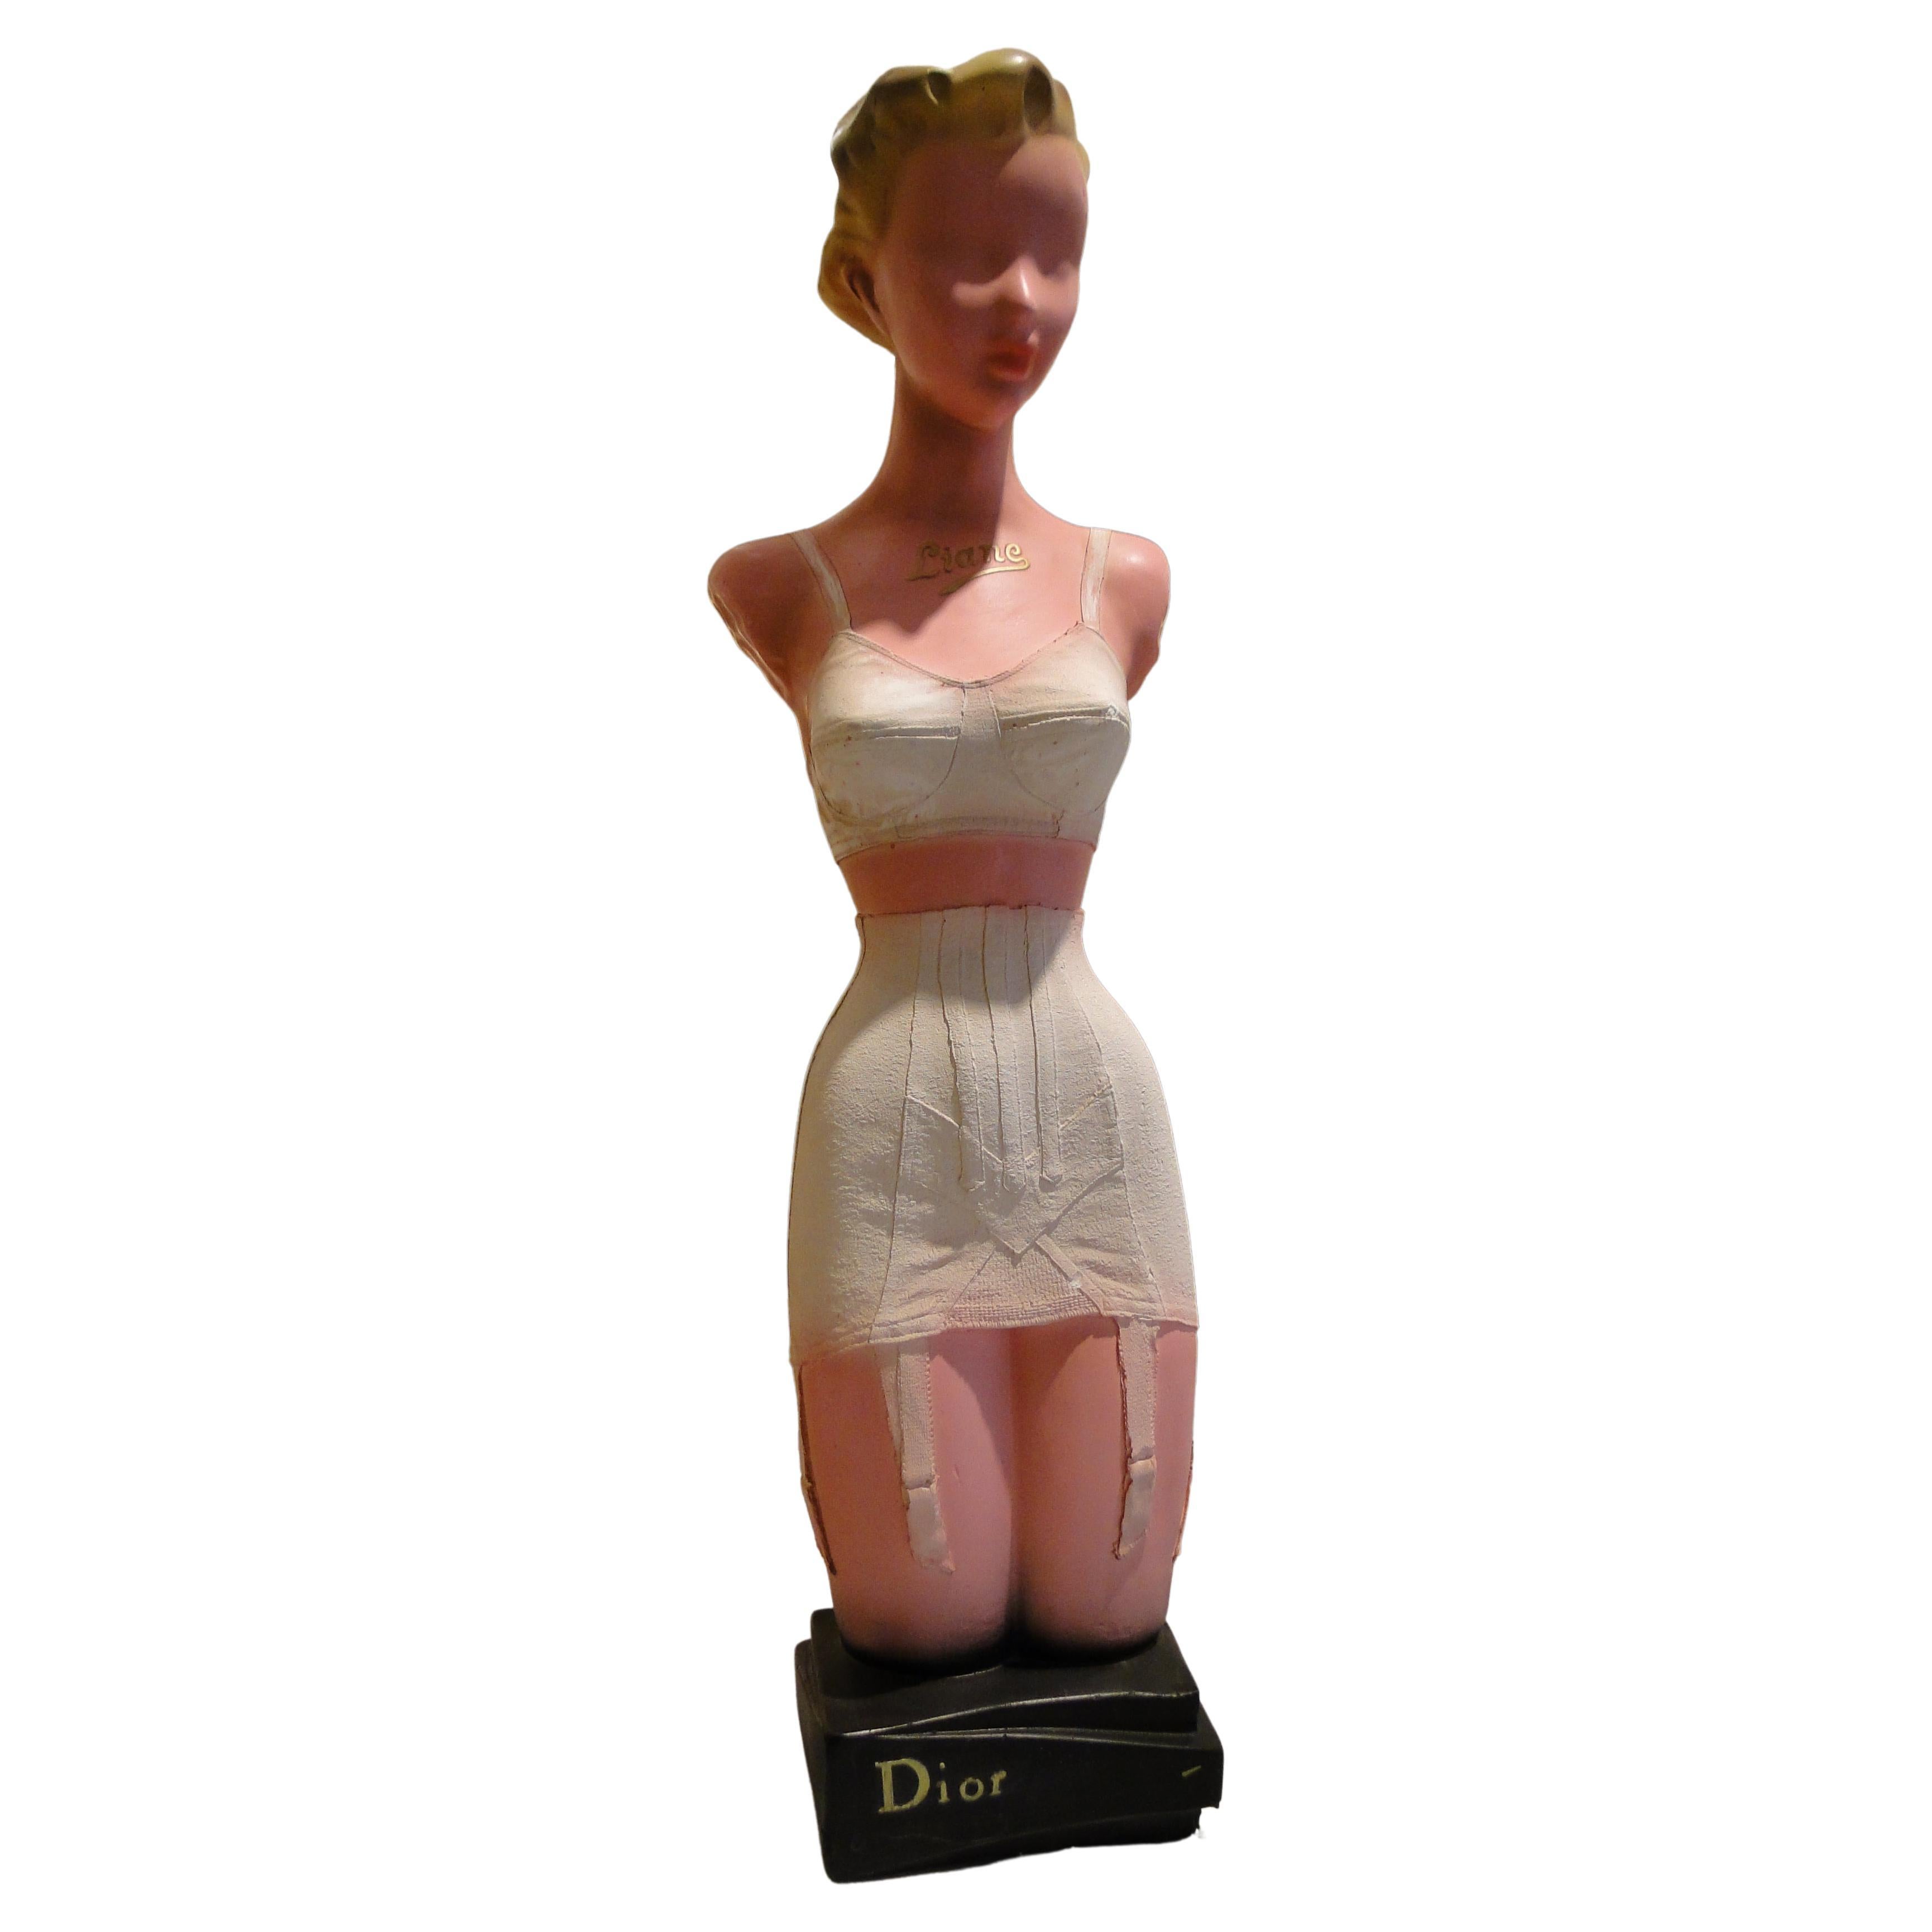  Christian Dior Vintage  Plaster Pin Up  Mannequin Mid Century